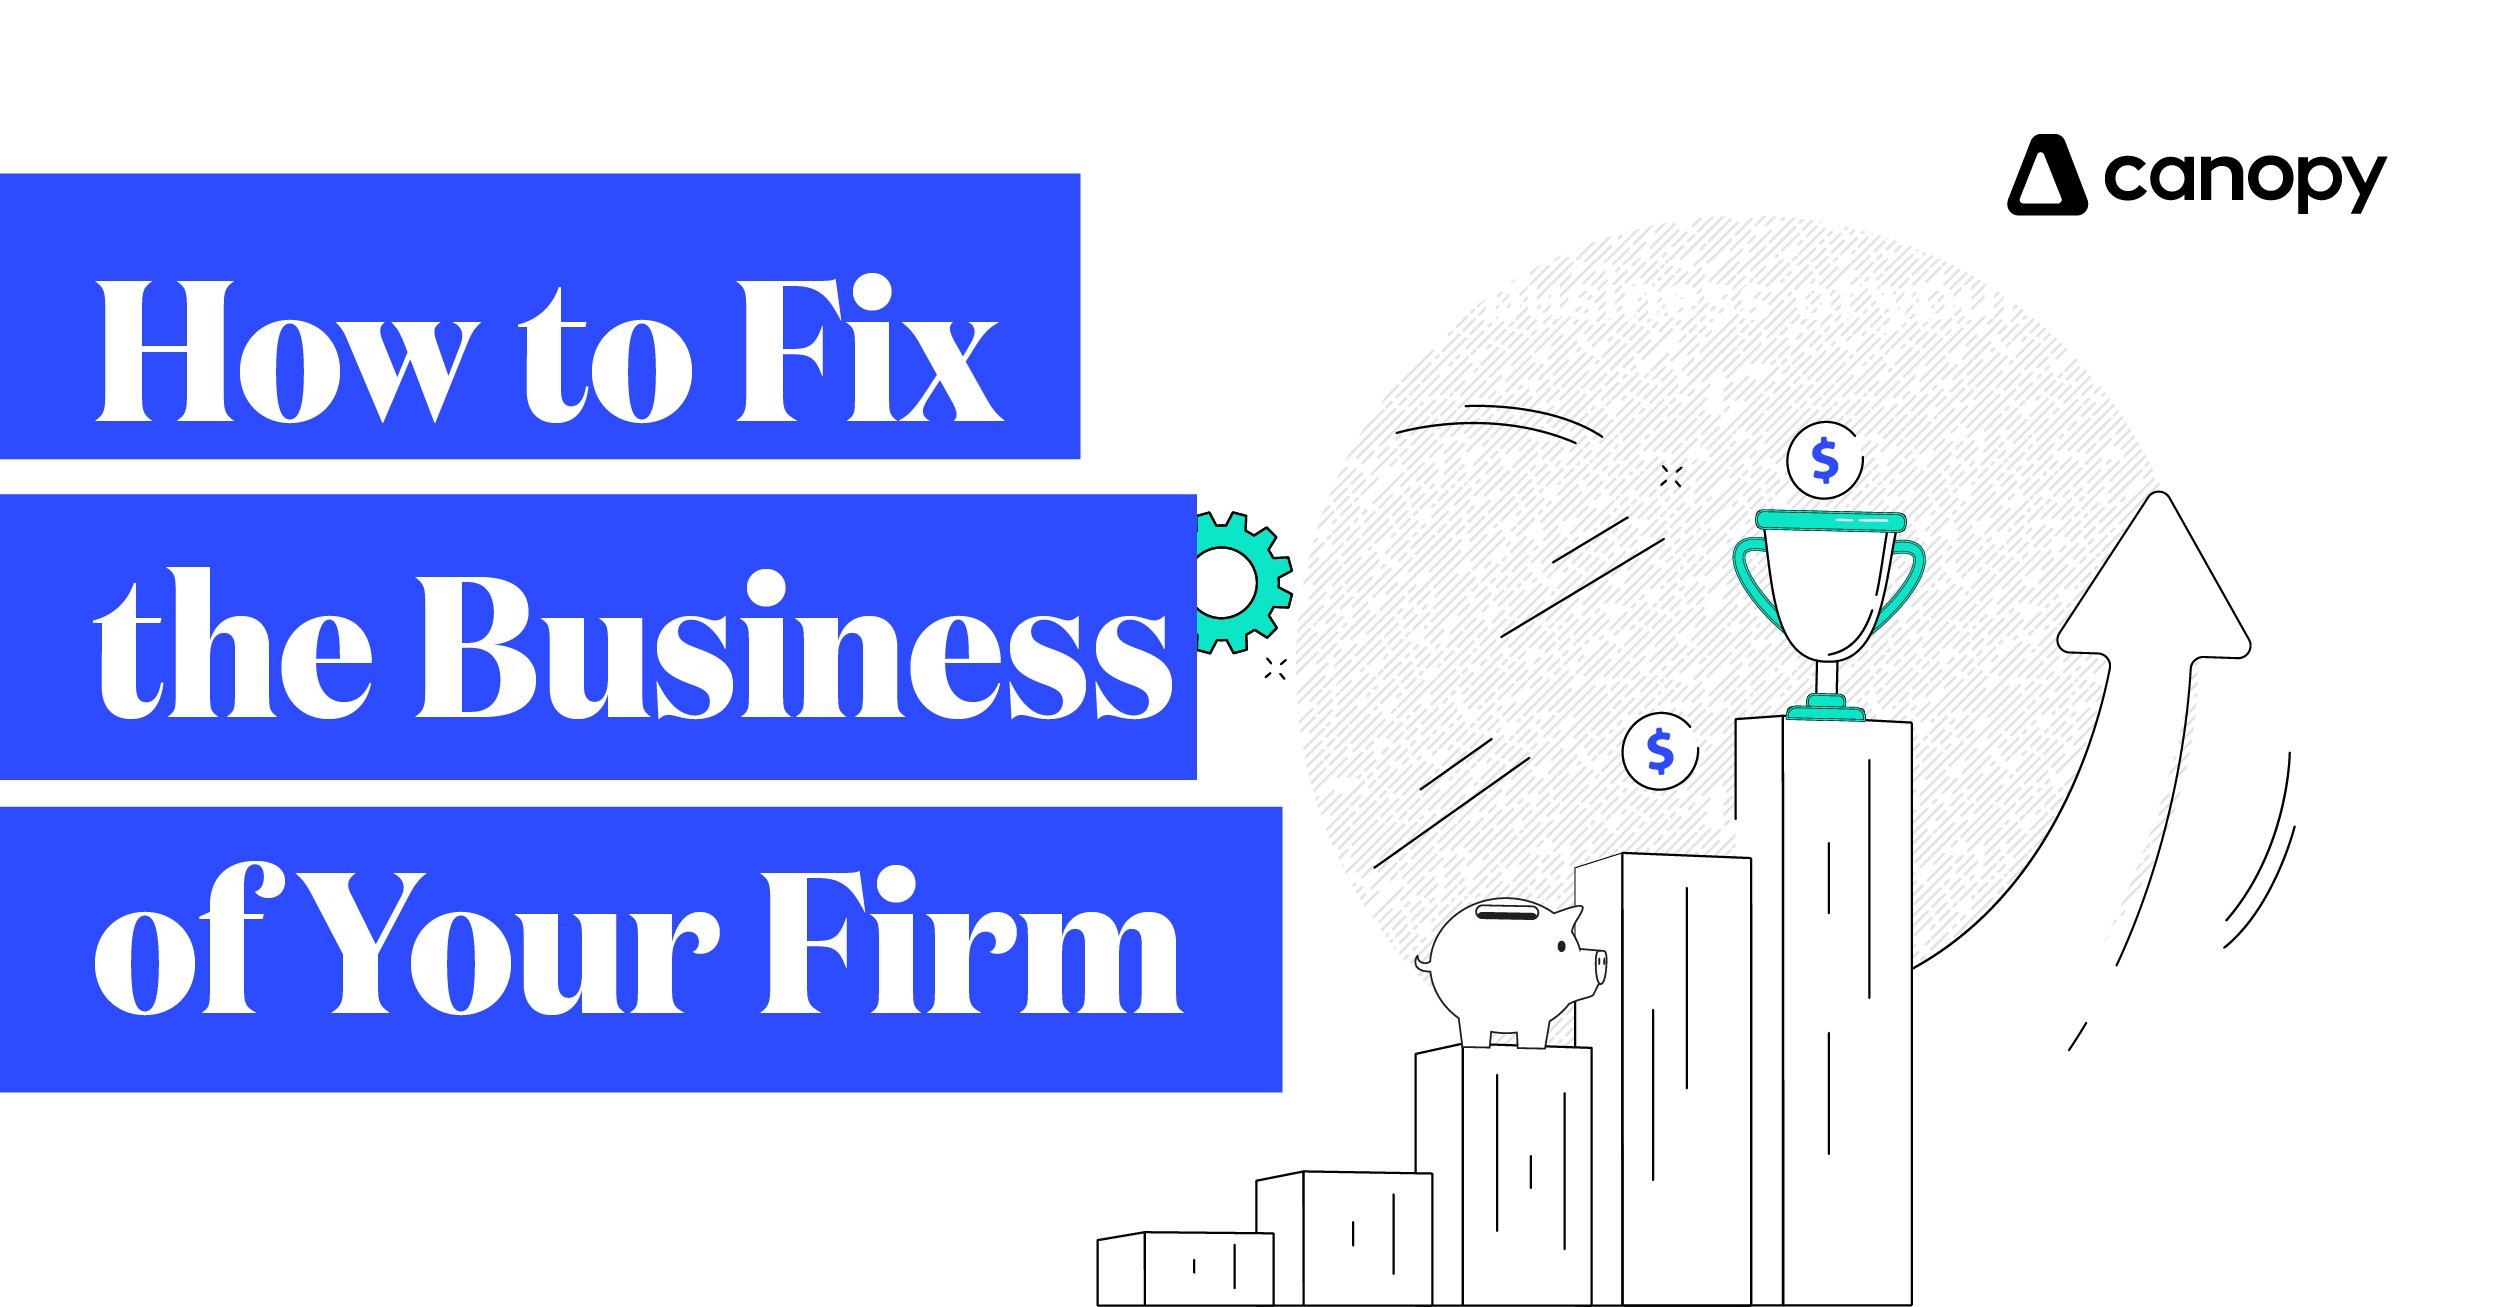 How to Fix the Business of Your Firm